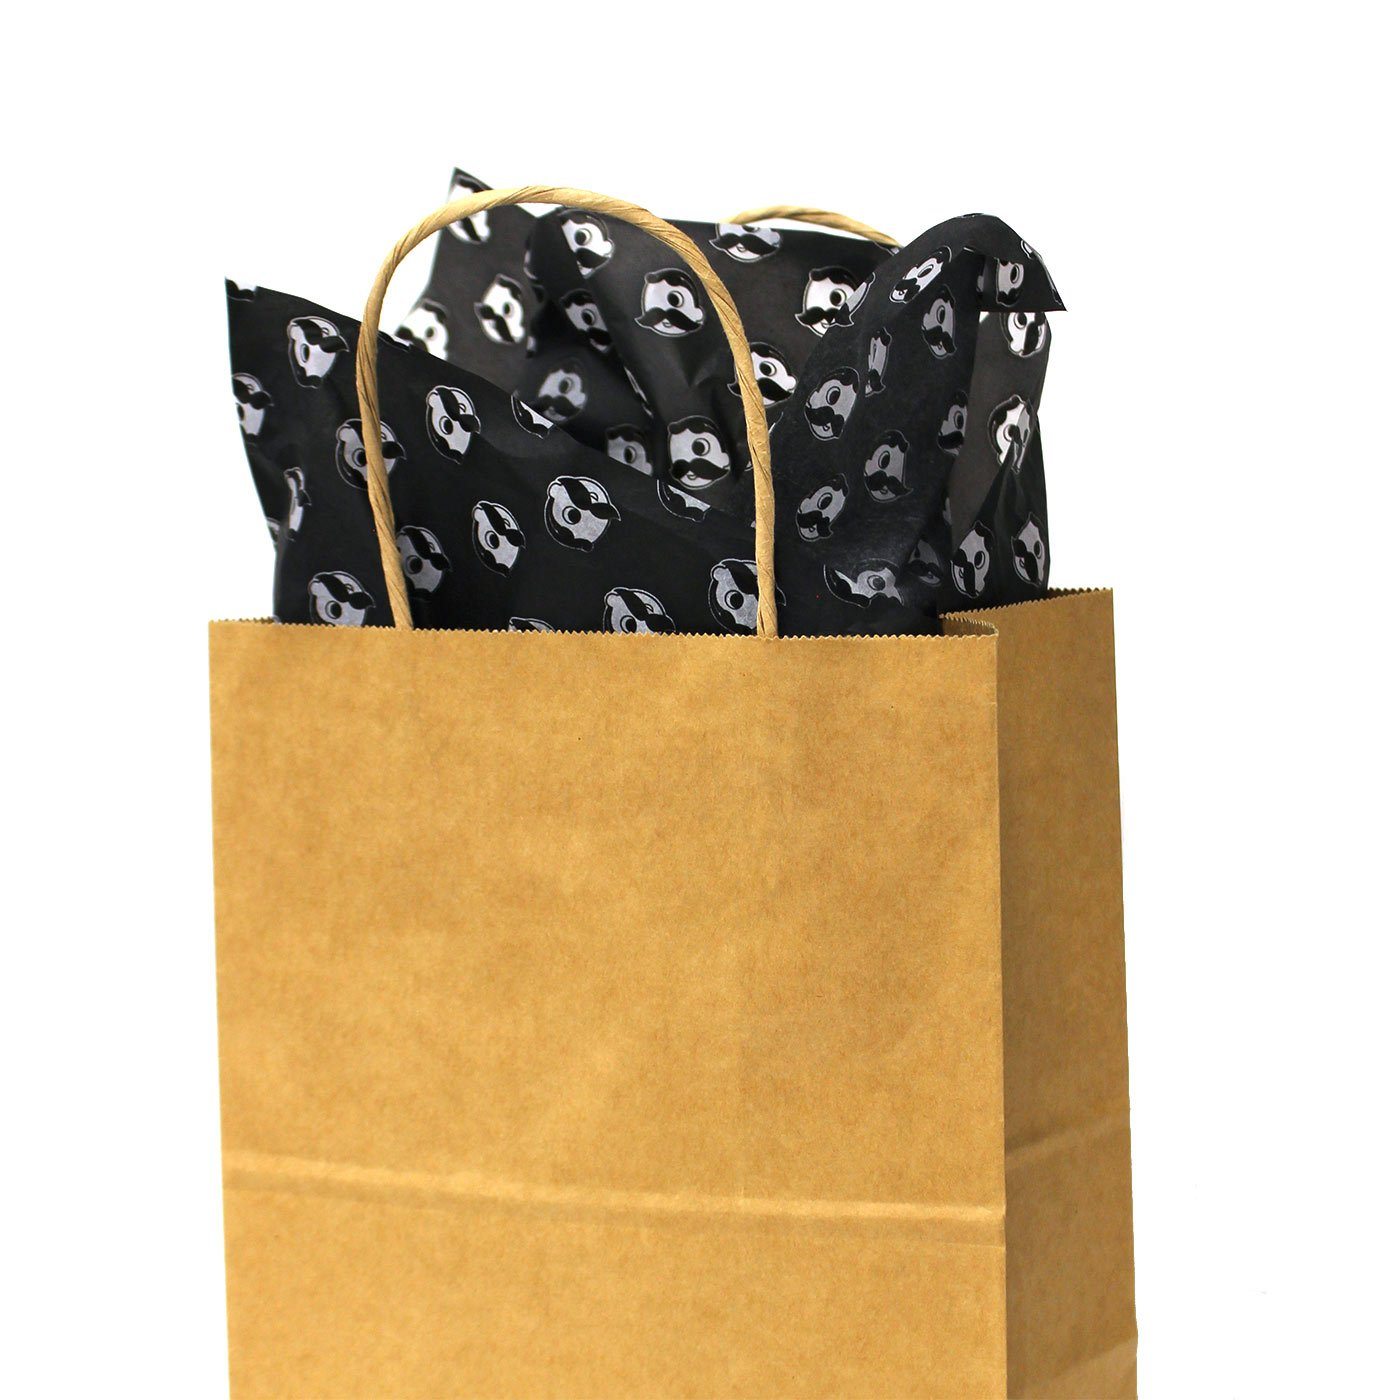 Natty Boh (Black) / Tissue Paper Pack - Route One Apparel